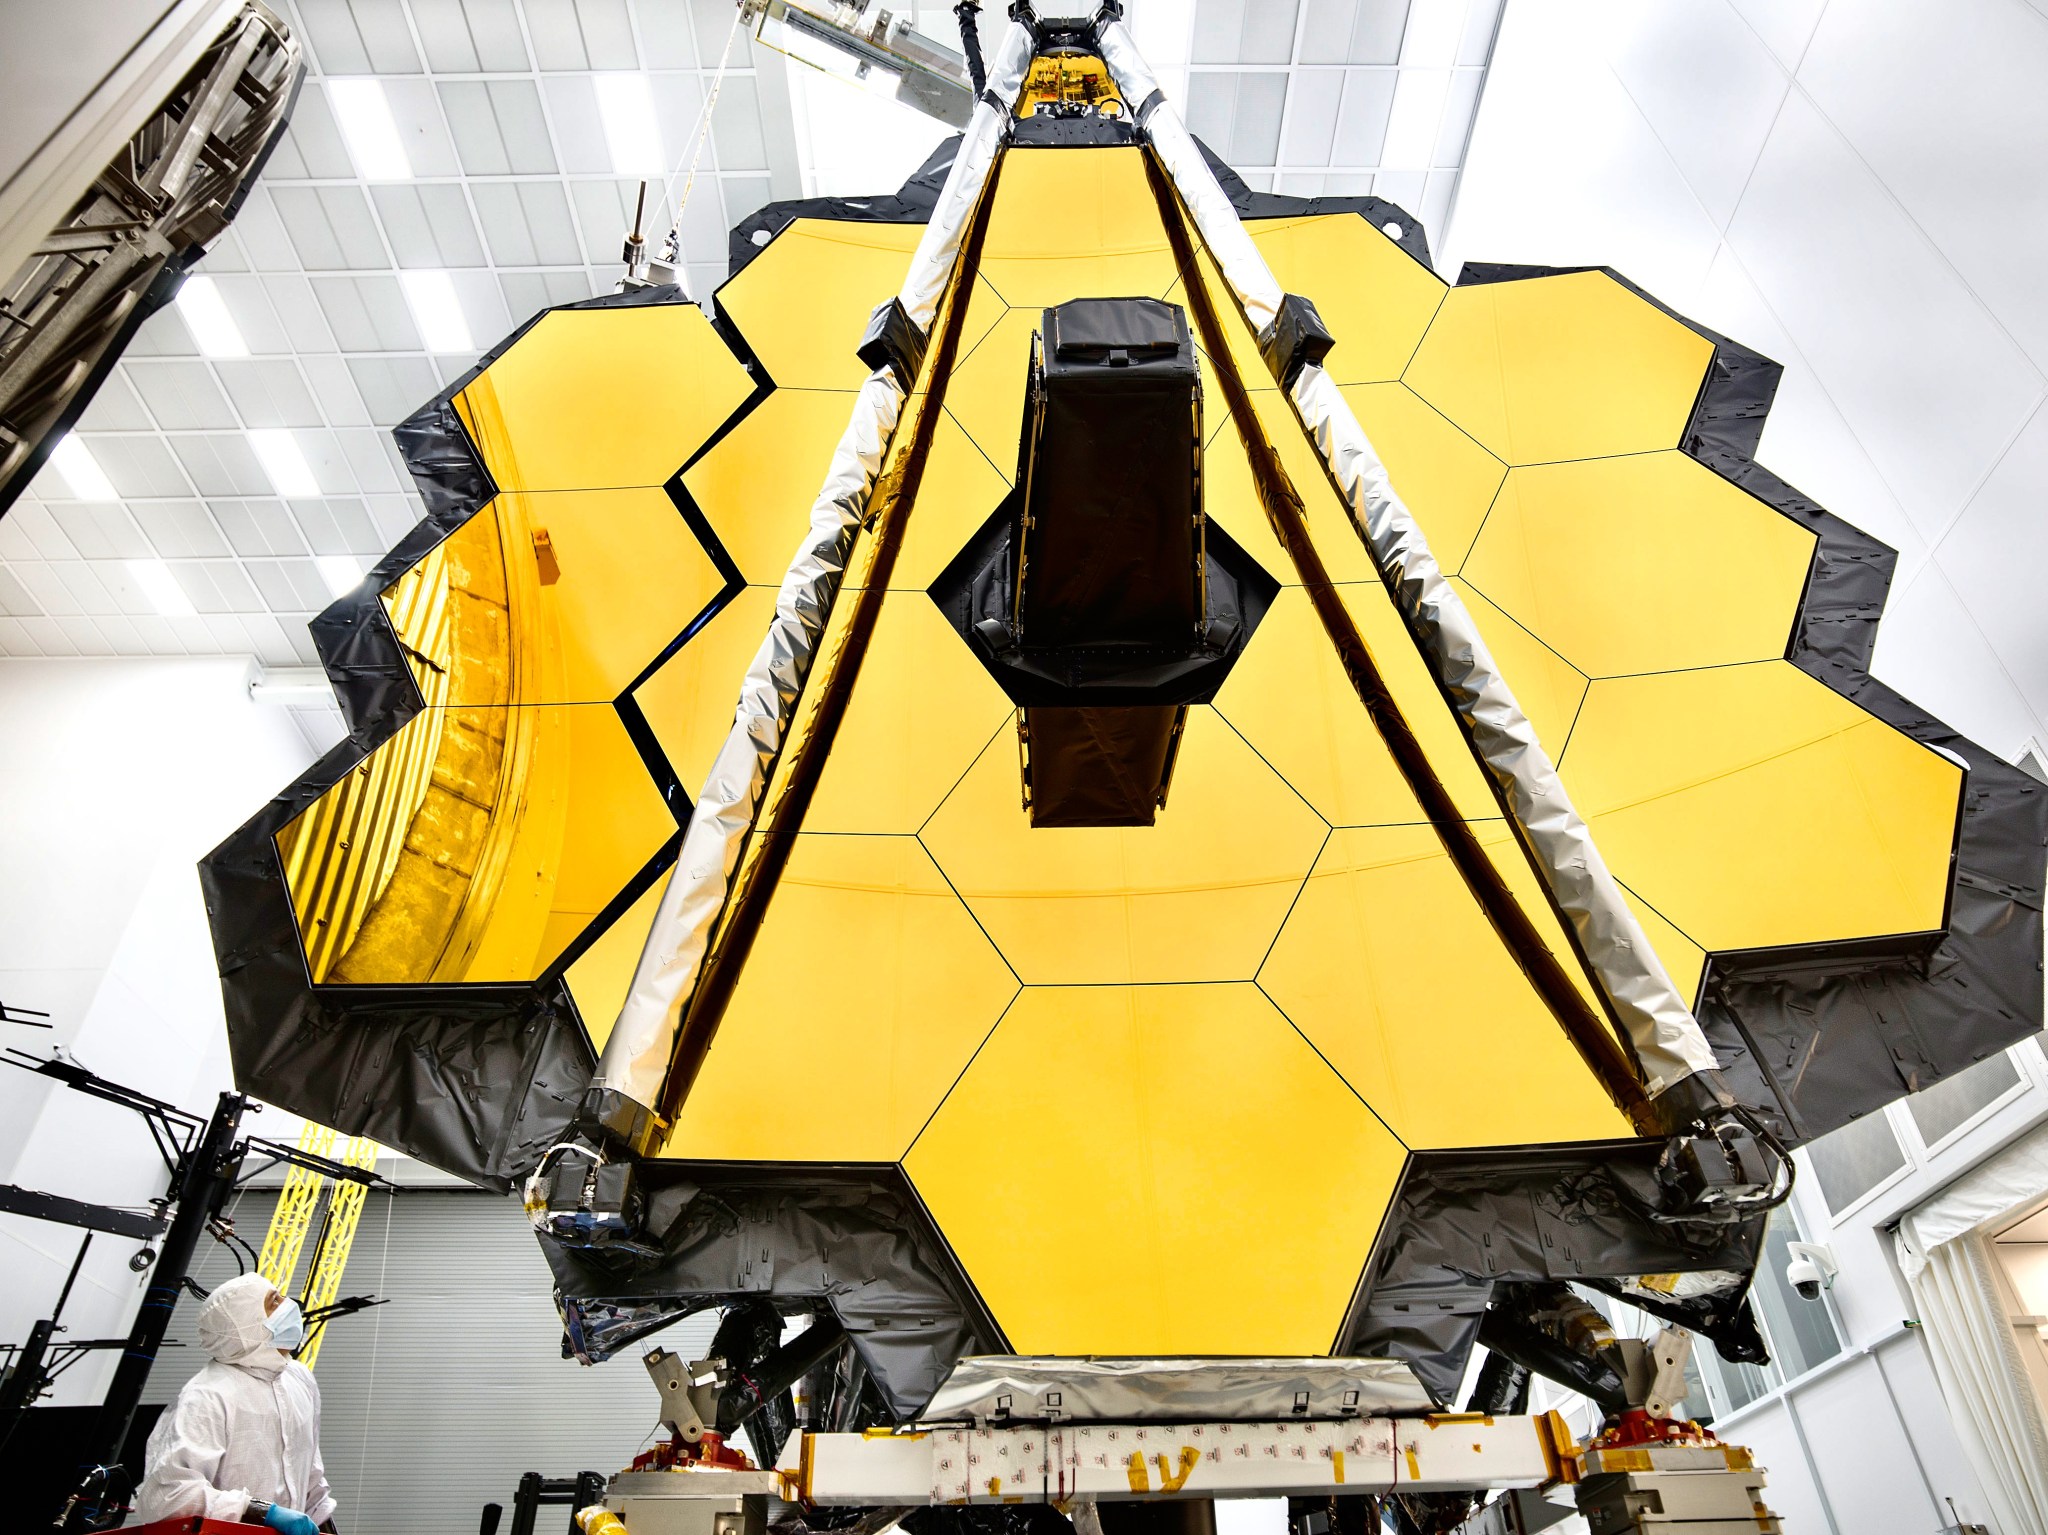 James Webb Space Telescope primary mirror at Goddard being prepared for testing at Johnson Space Center.